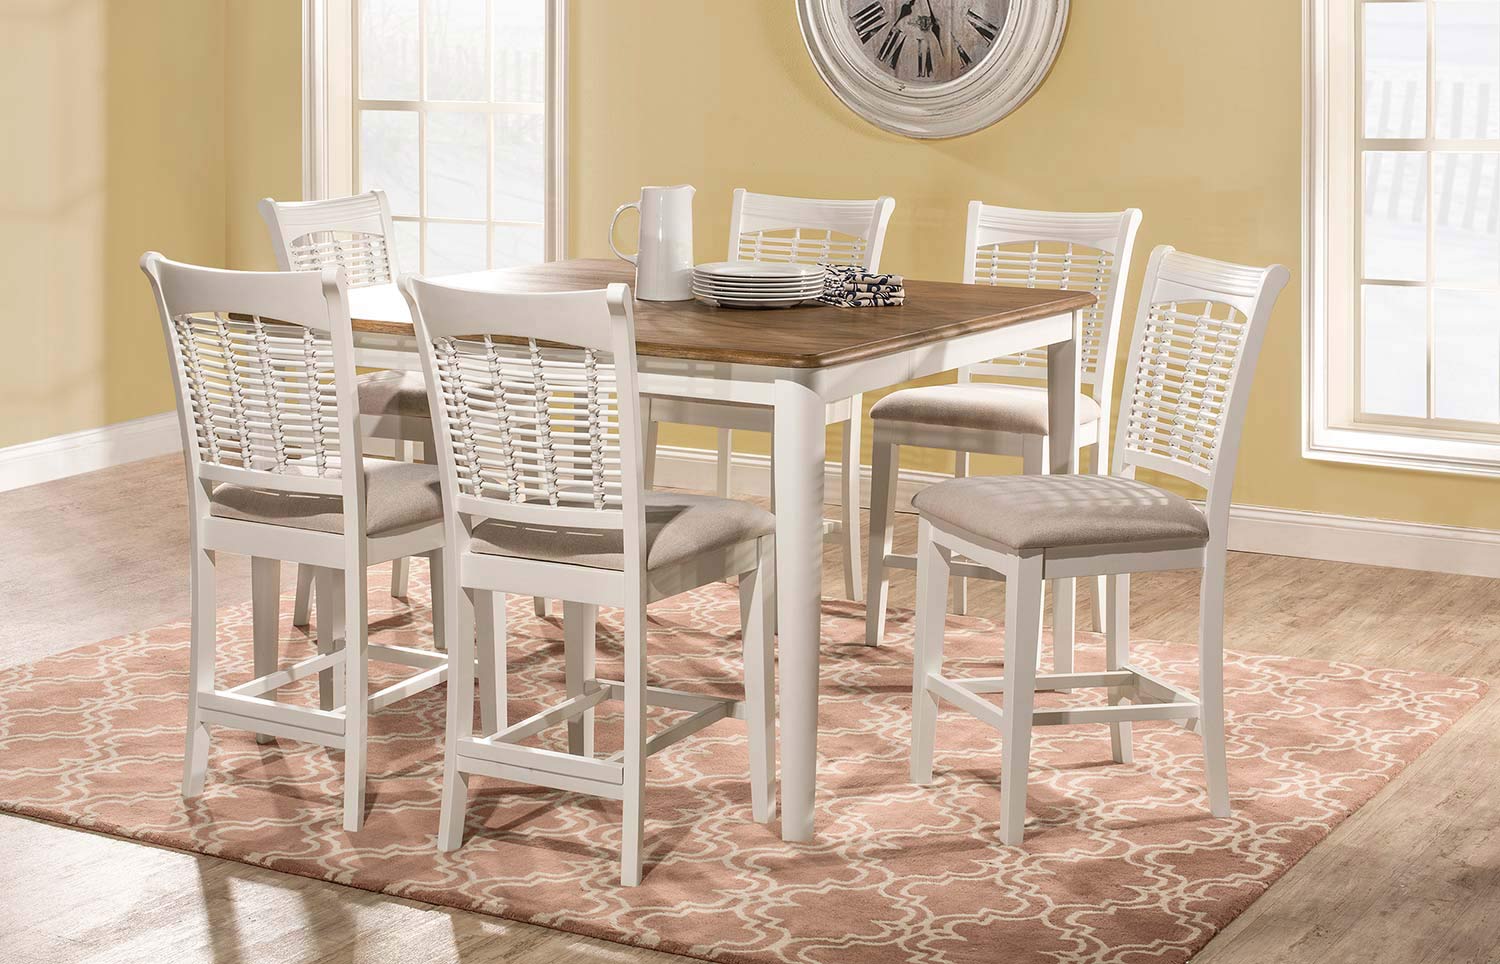 Hillsdale Bayberry 7-Piece Counter Height Dining Set - White/Driftwood